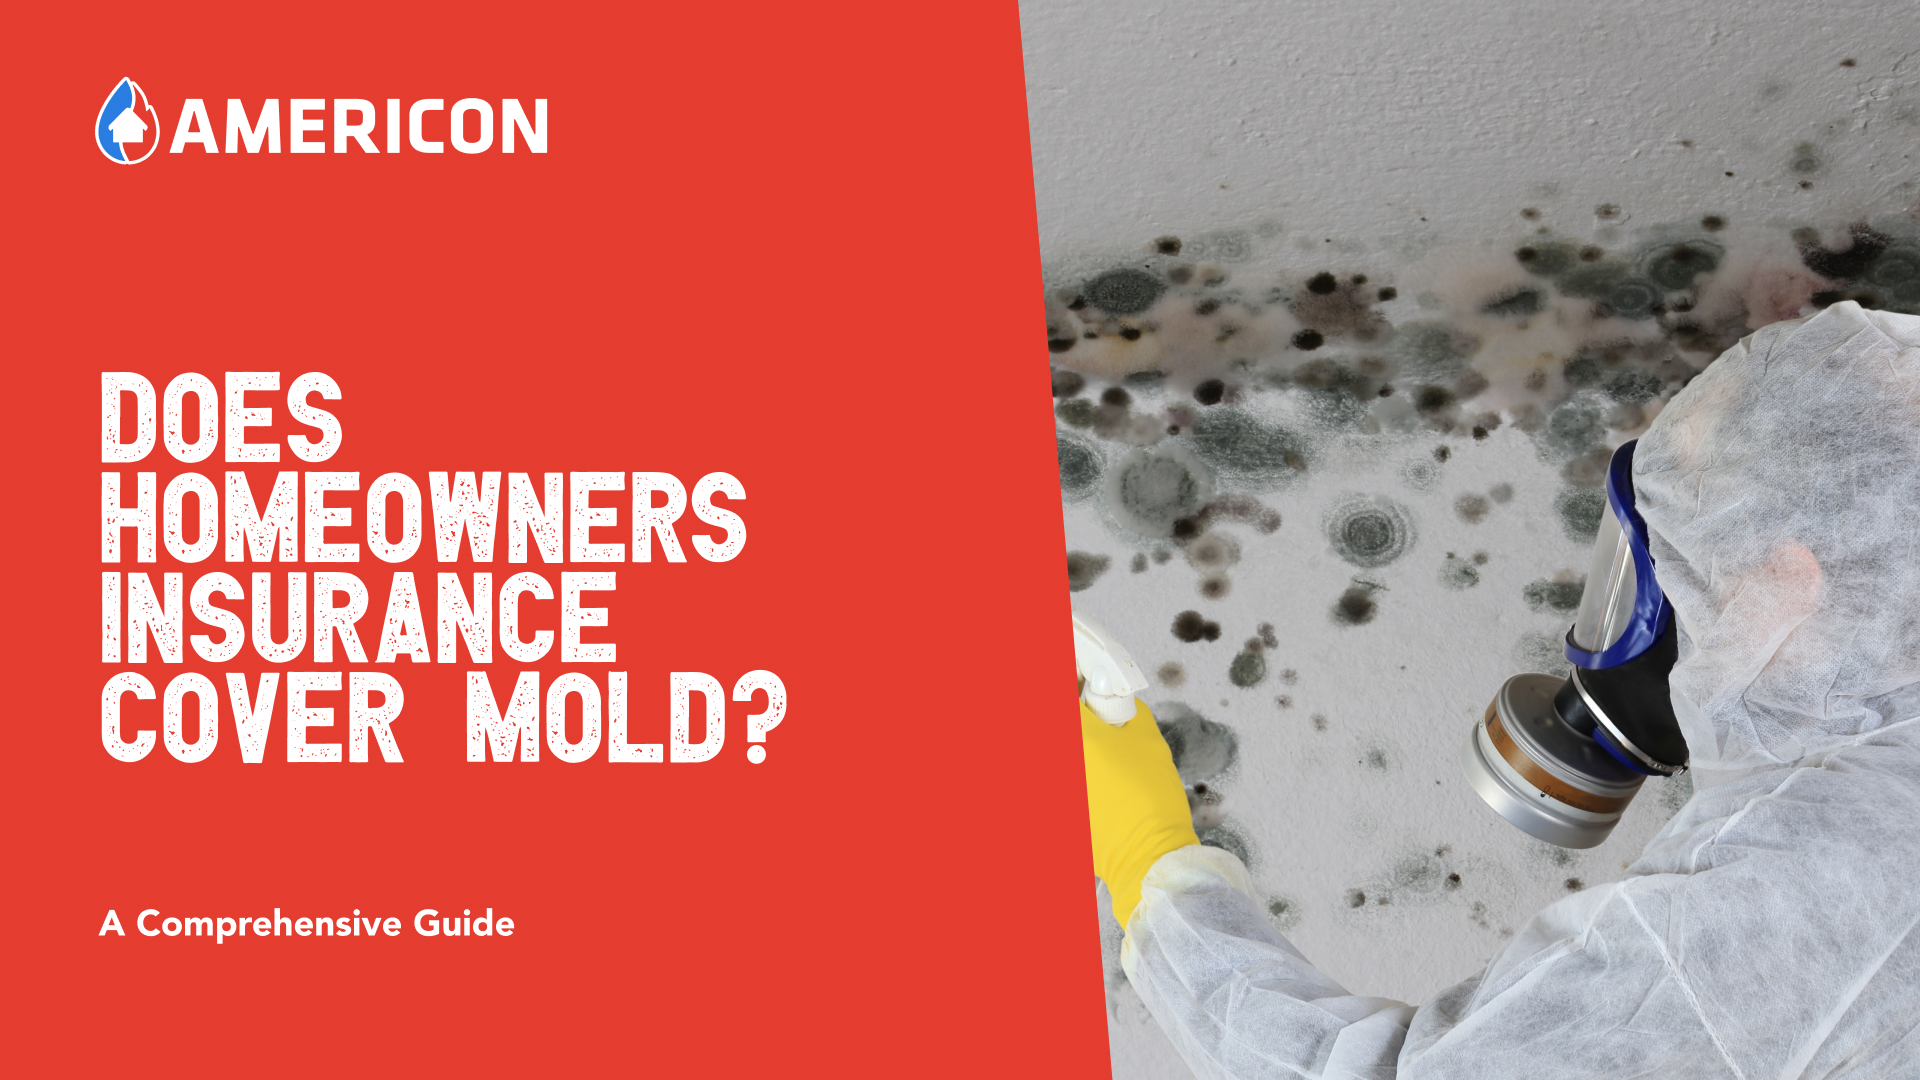 Does homeowners insurance cover mold?